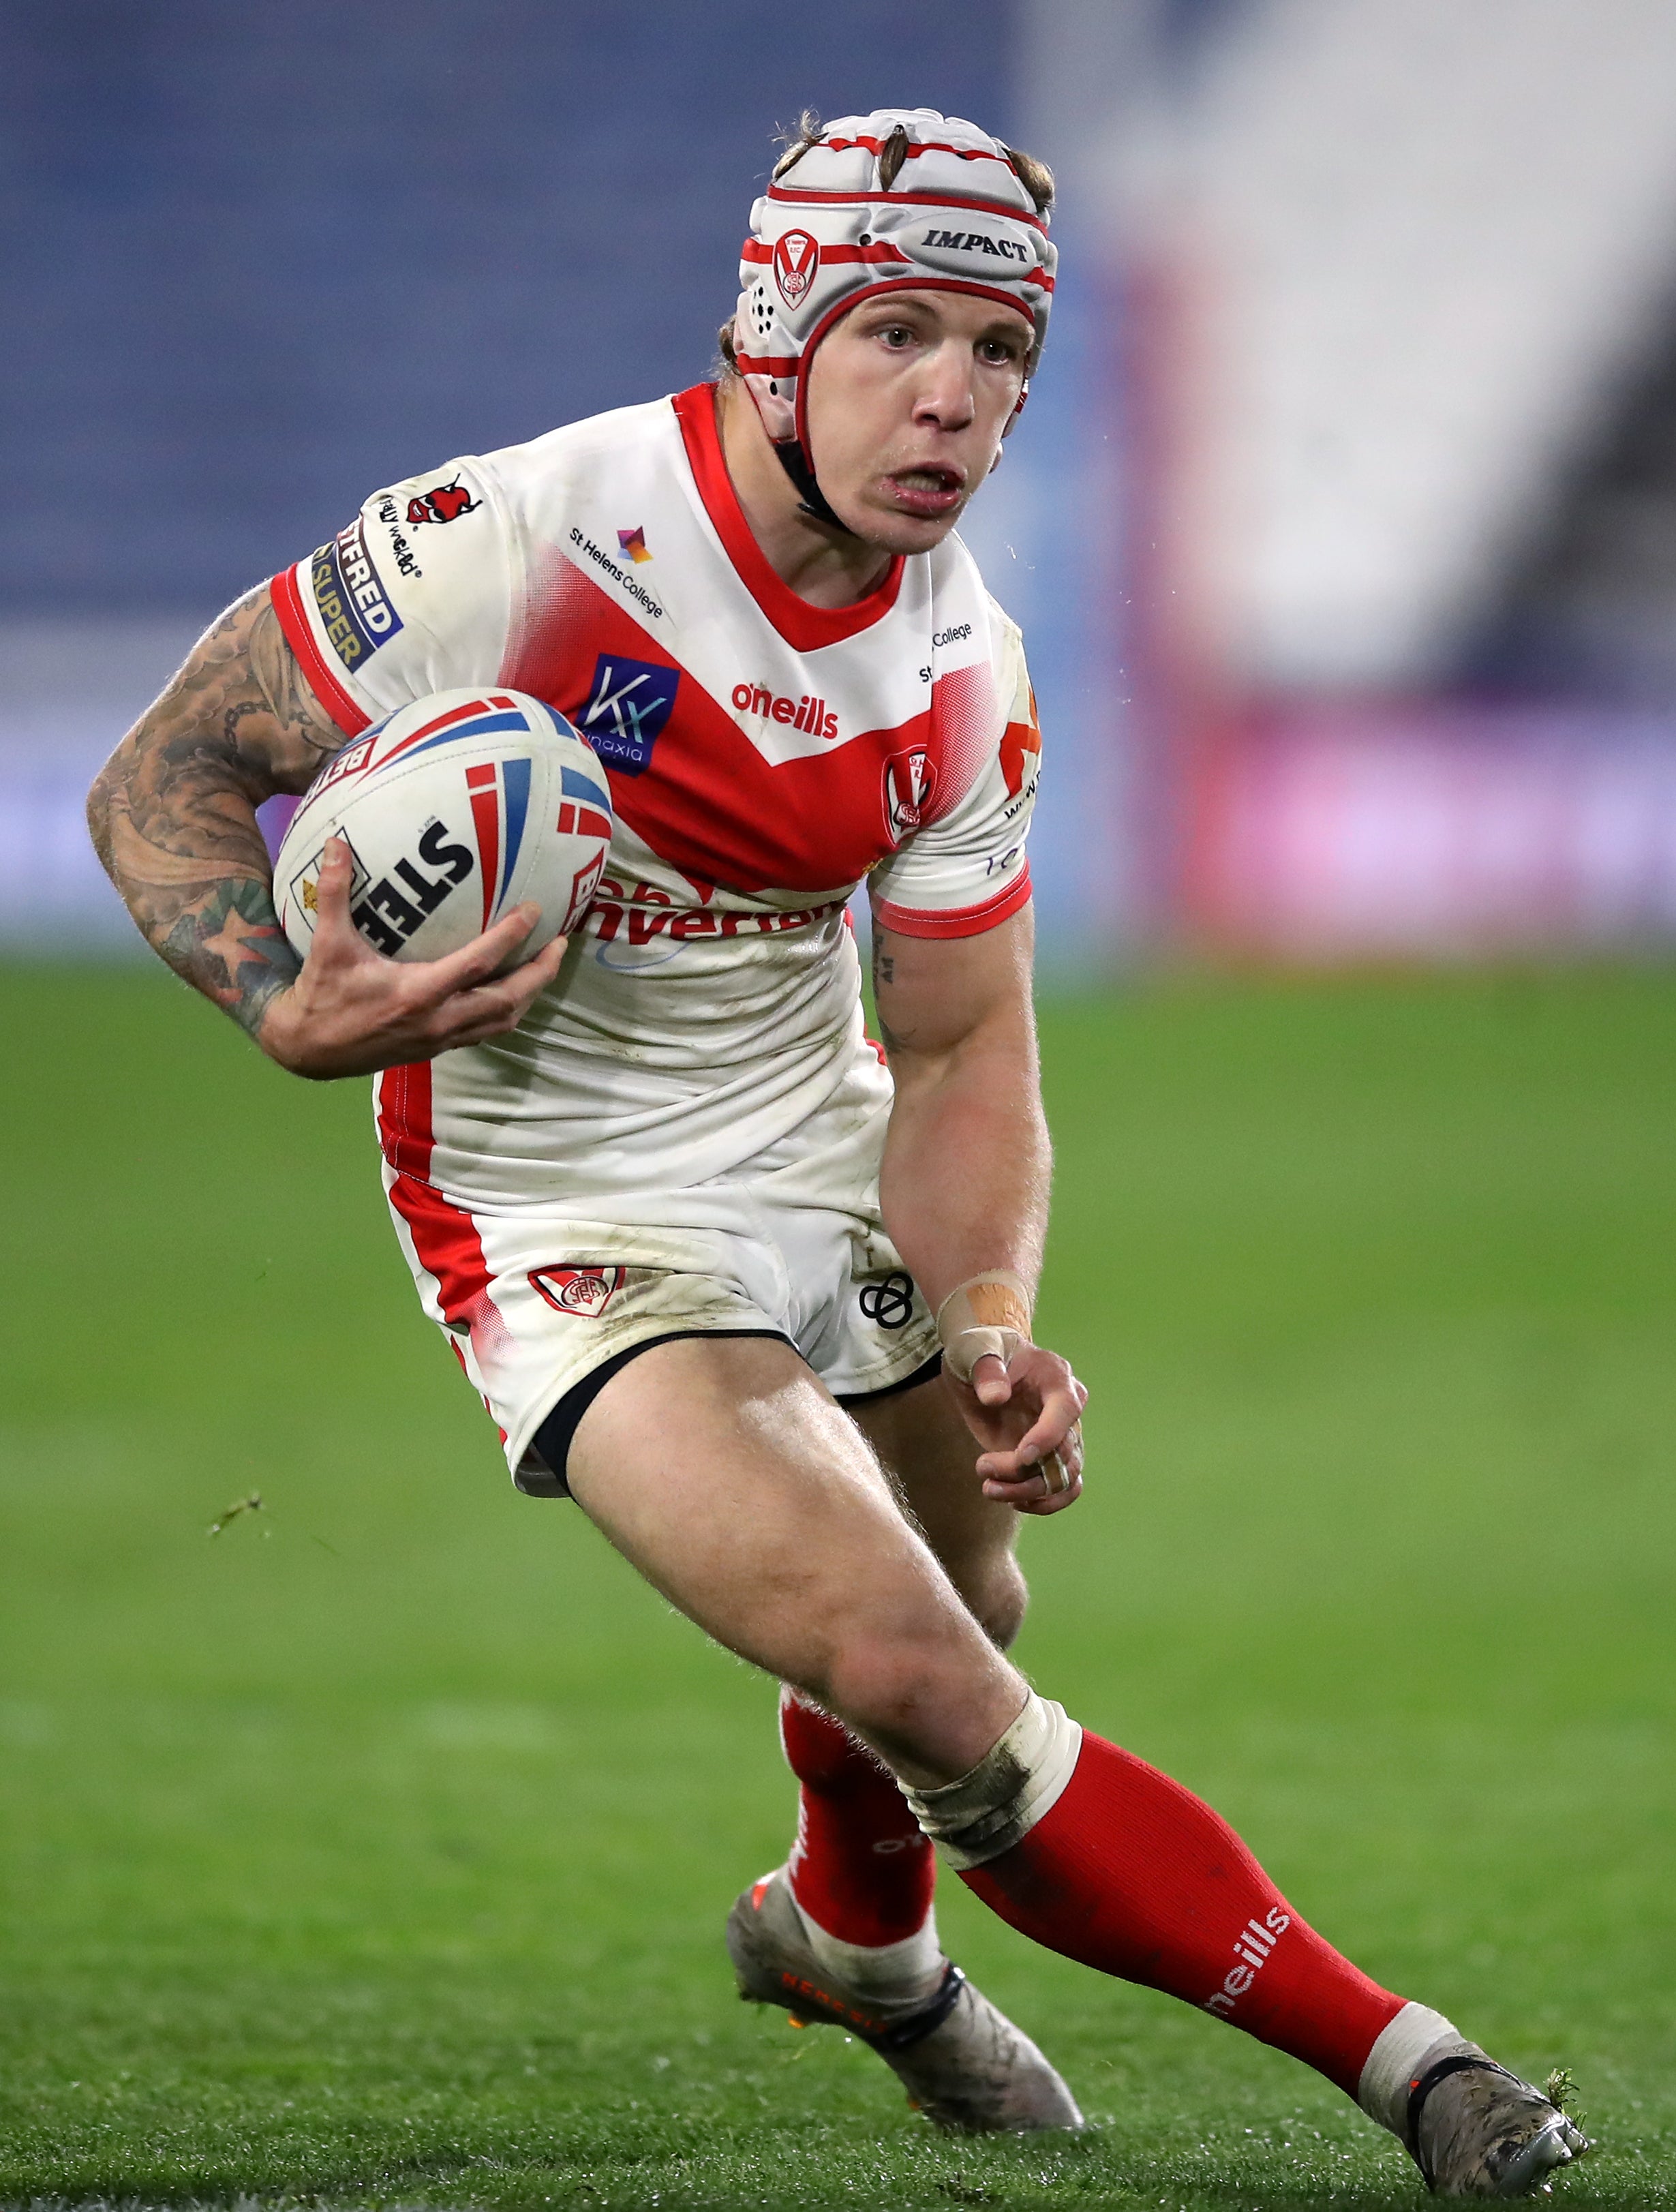 Theo Fages’ injury in the Challenge Cup final paved the way for his understudy Lewis Dodd to go on a run that culminated in him winning a Super League ring (PA Images/Martin Rickett)